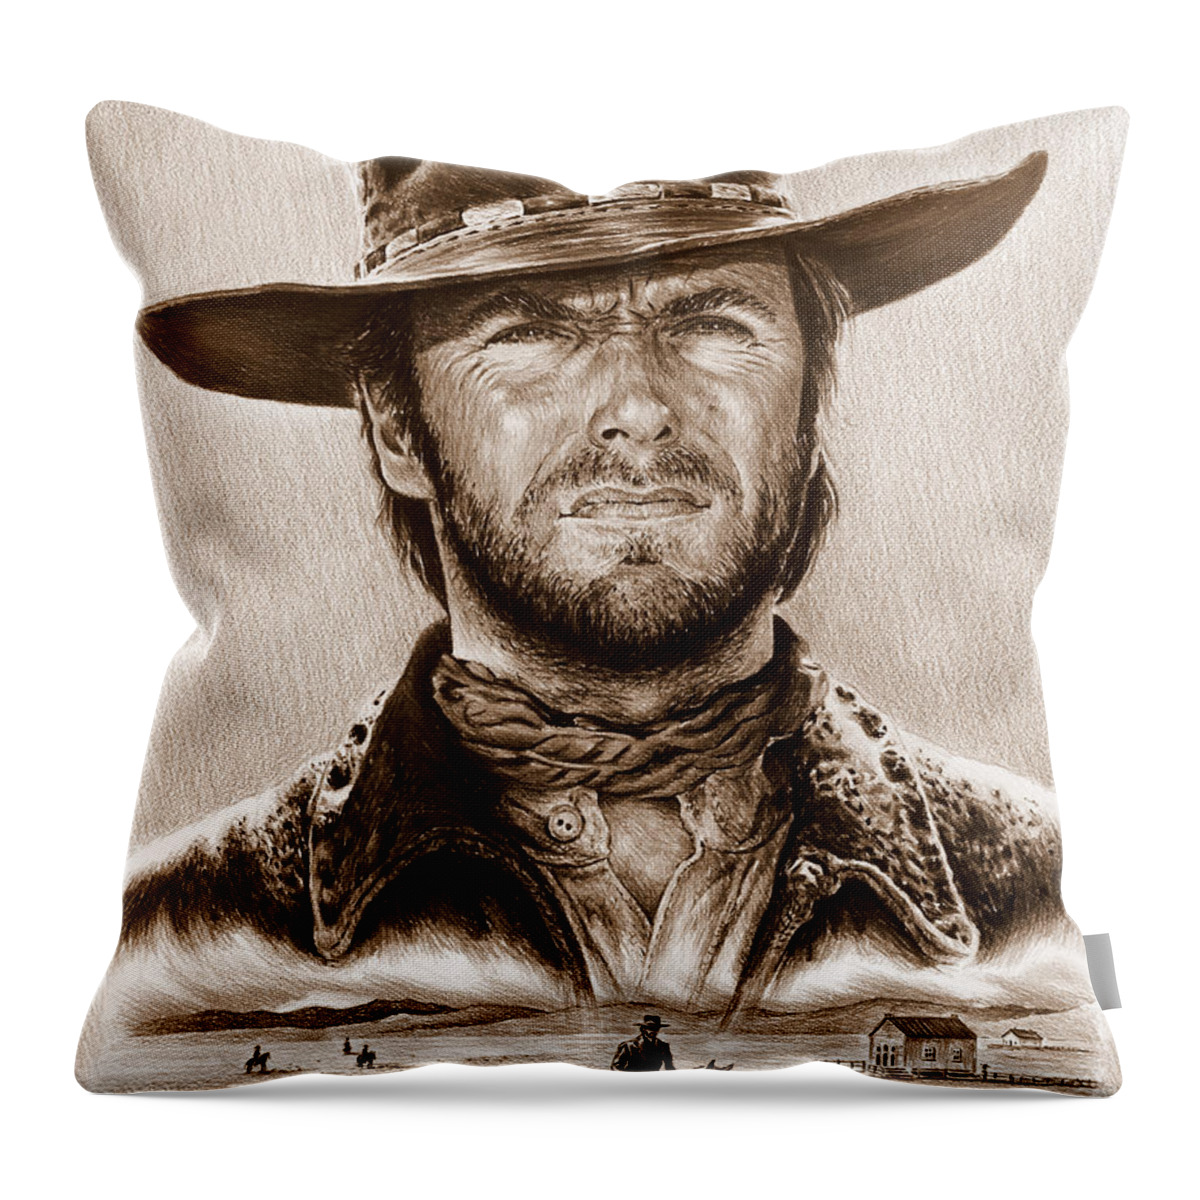 Clint Eastwood Throw Pillow featuring the drawing Clint Eastwood The Stranger by Andrew Read